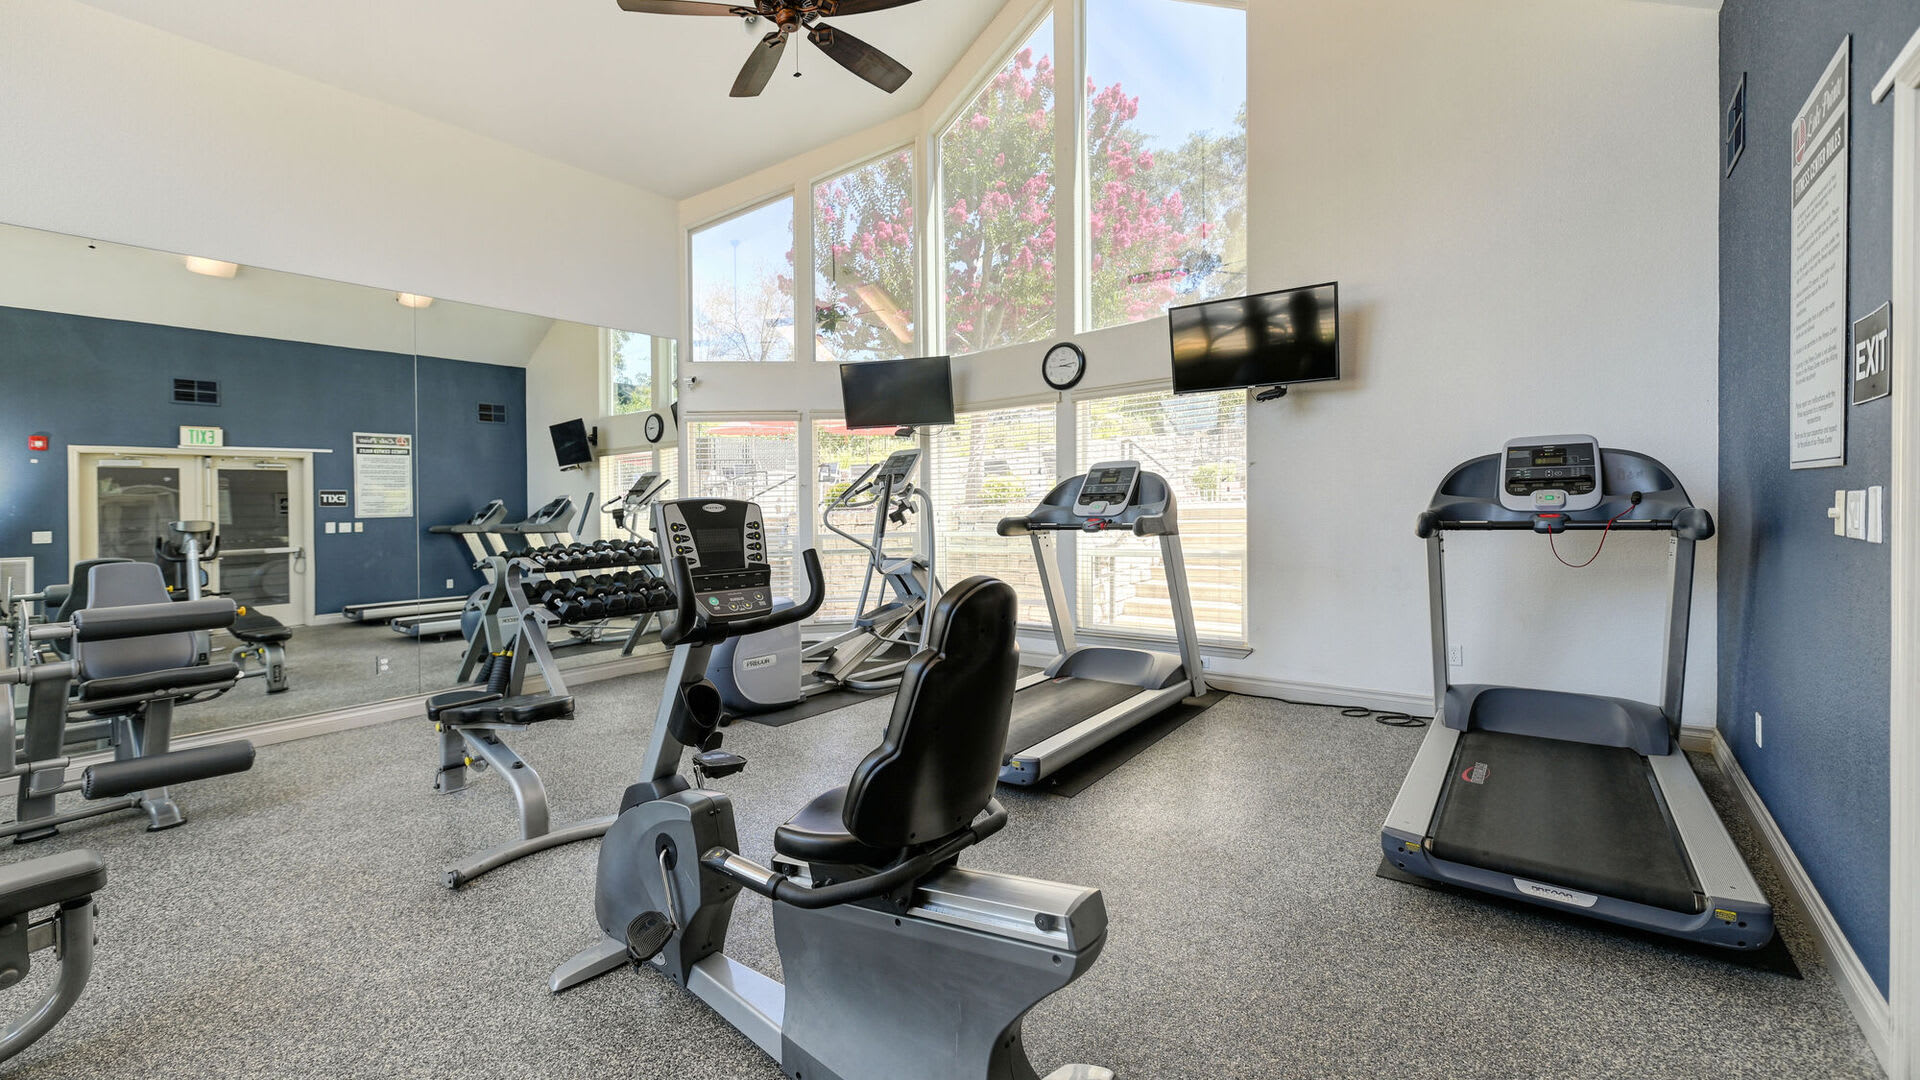 Cardio equipment and gym at Lake Pointe Apartments in Folsom, California